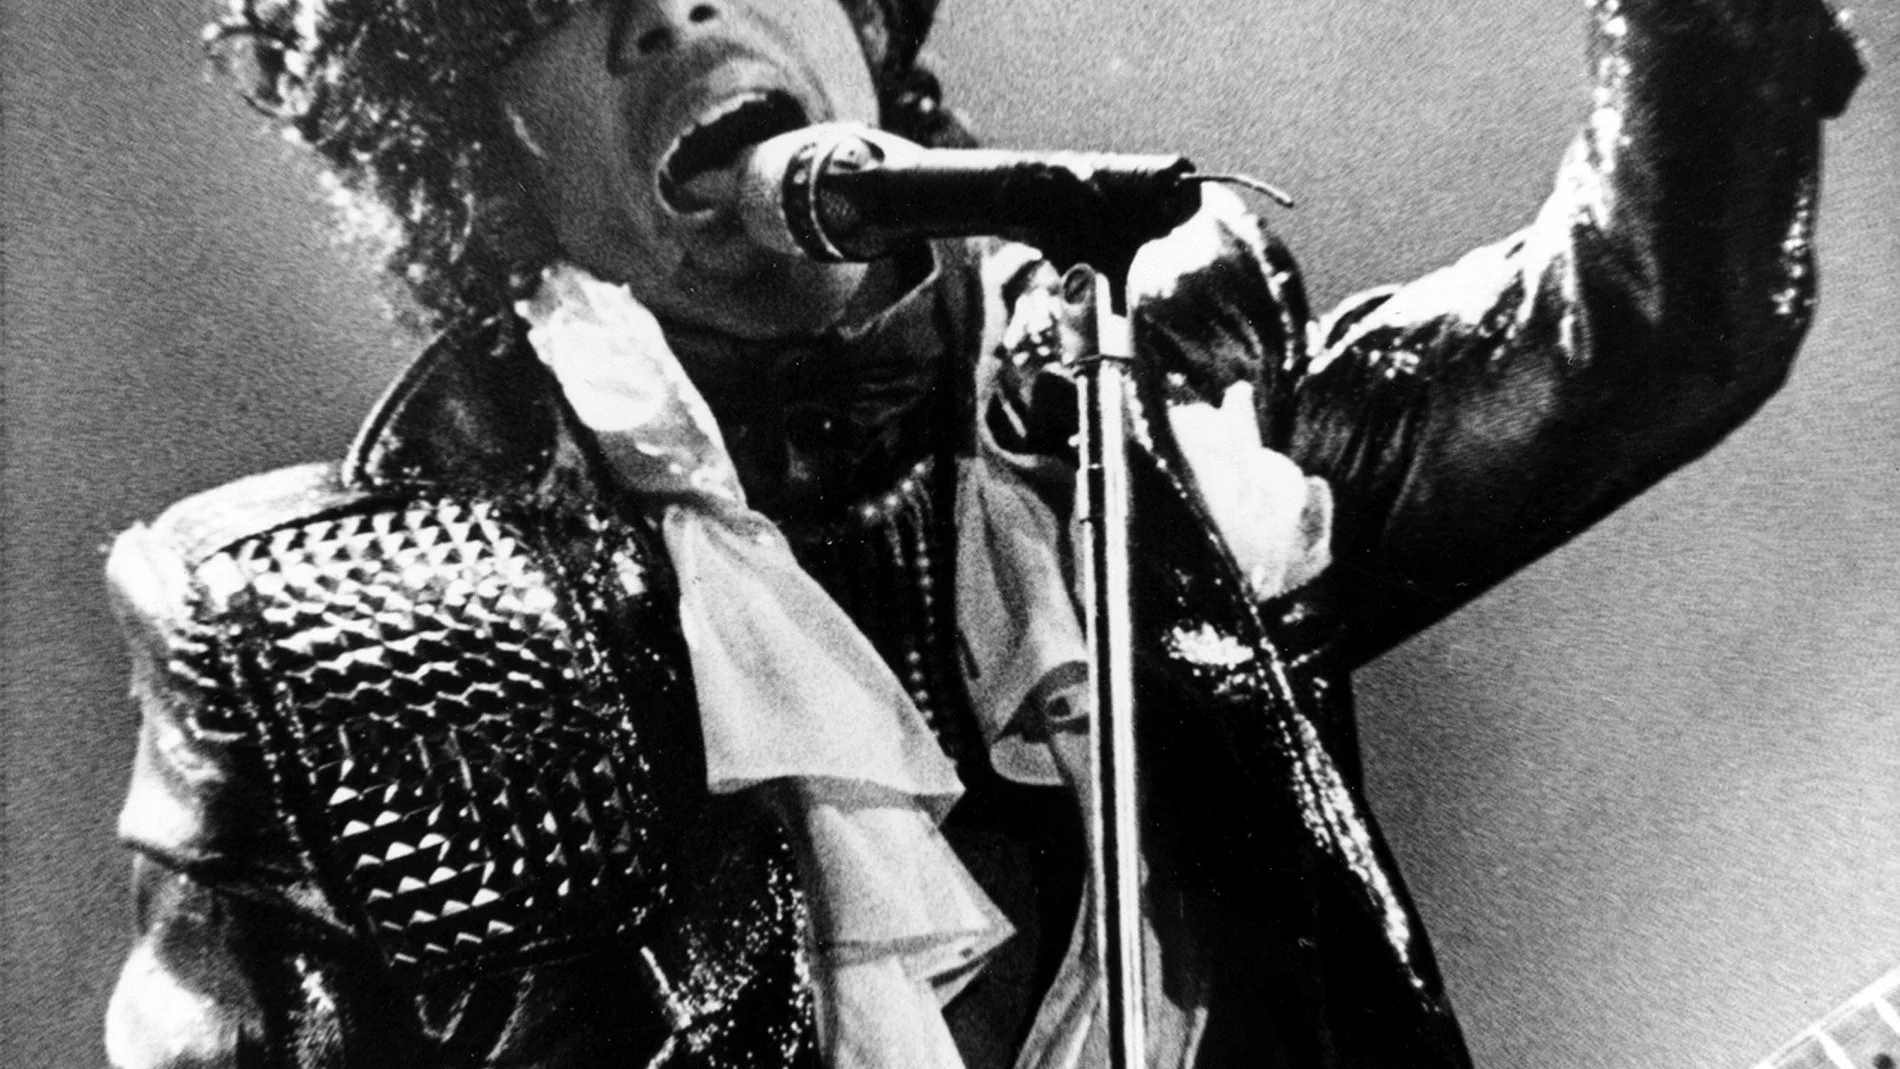 FILE - In this Jan. 22, 1985 file photo, Prince performs in concert at Riverfront Coliseum during his Purple Rain Tour in Cincinnati, Ohio. Prince's publicist has confirmed that Prince died at his his home in Minnesota, Thursday, April 21, 2016. He was 57. (AP Photo/Rob Burns, File)